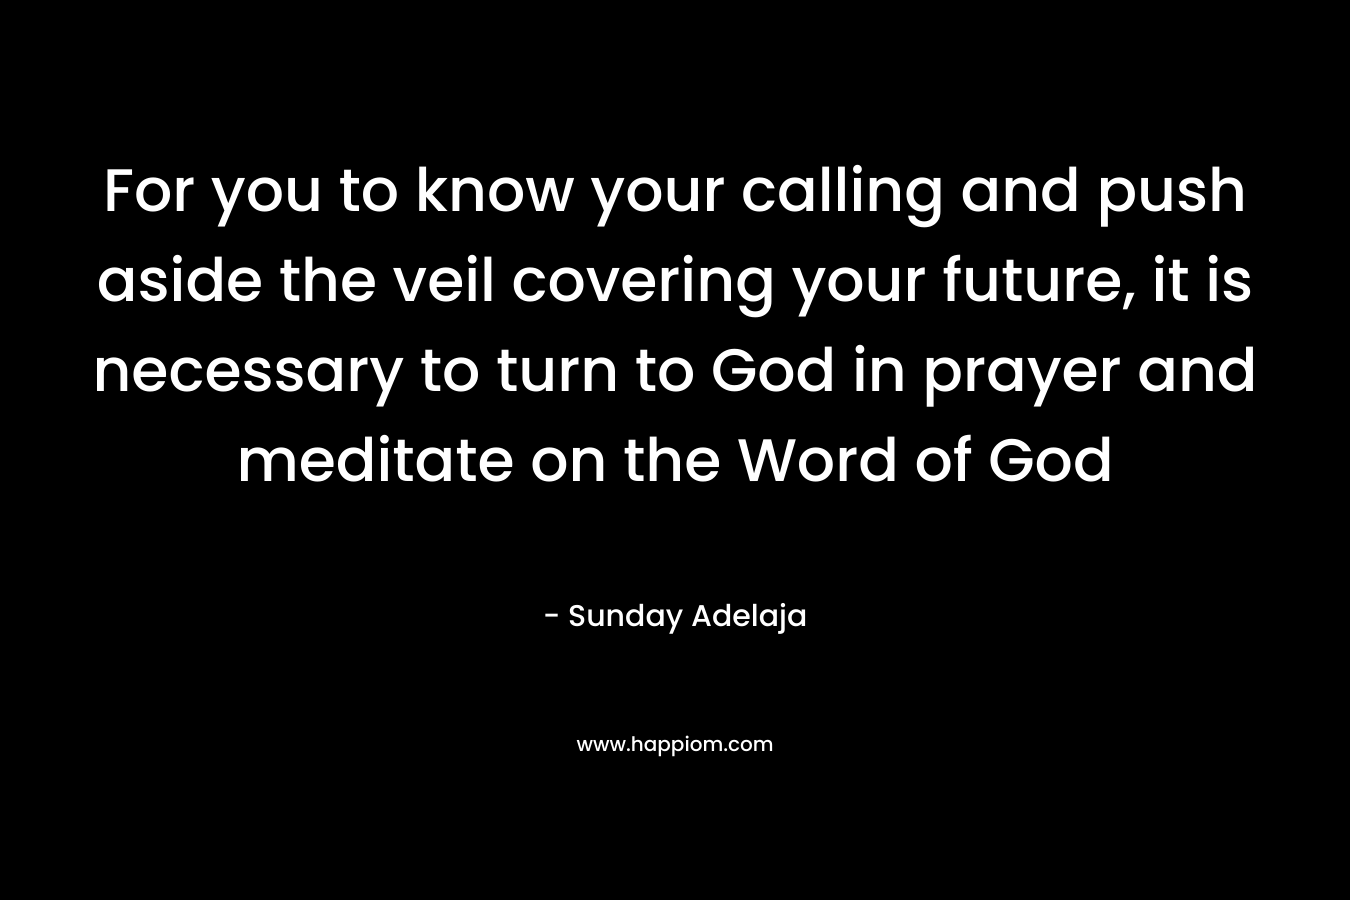 For you to know your calling and push aside the veil covering your future, it is necessary to turn to God in prayer and meditate on the Word of God – Sunday Adelaja